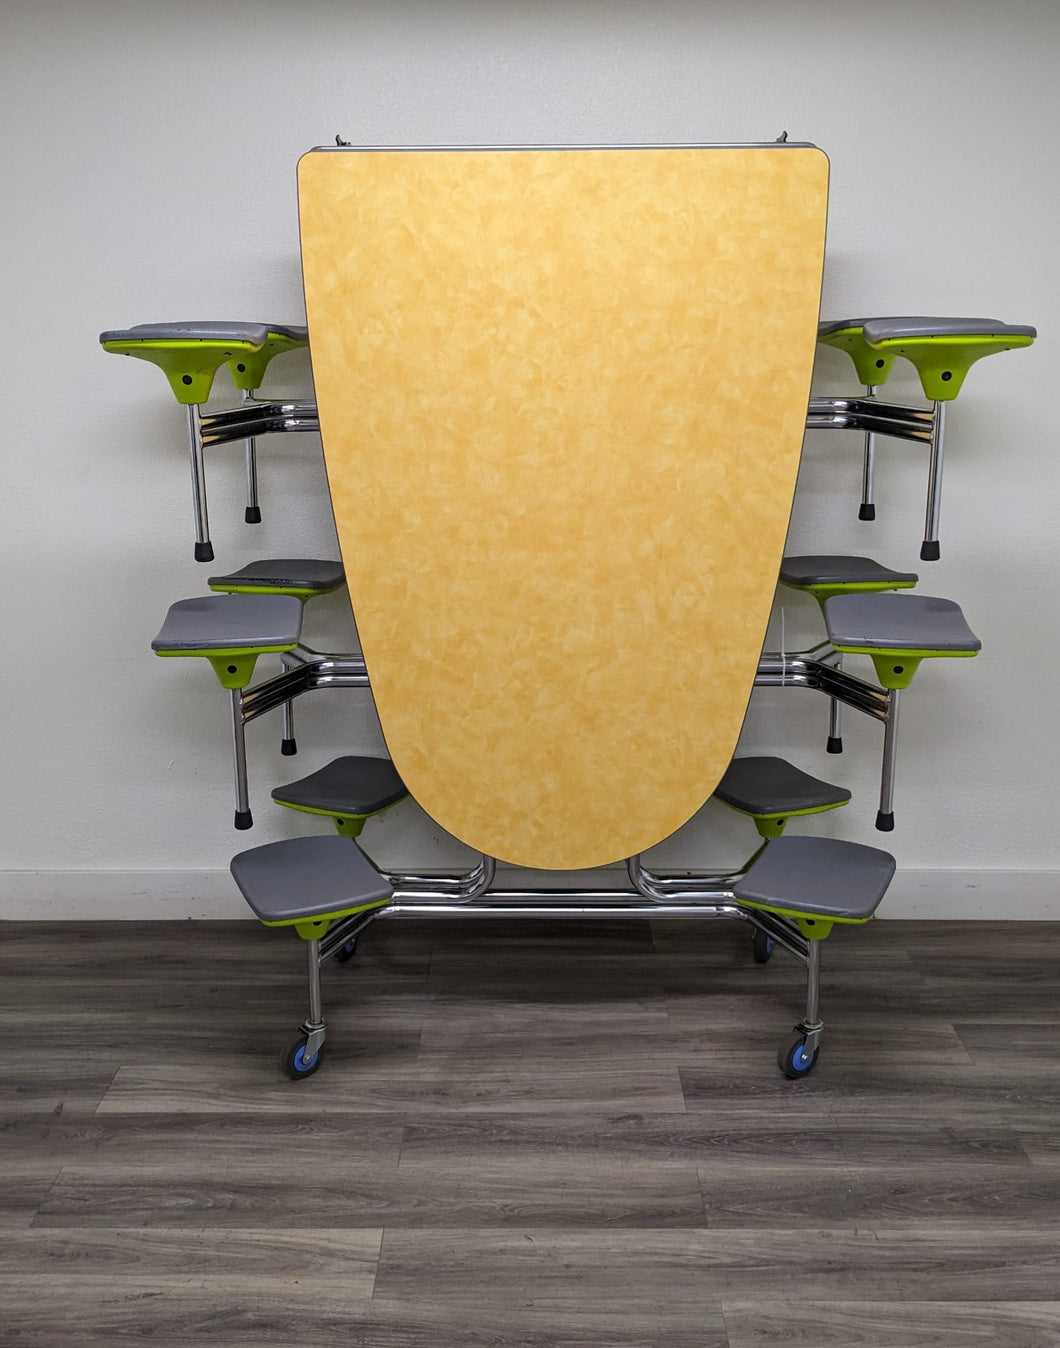 10ft Cafeteria Lunch Table w/ 12 Stool Seat, Yellow Top, Gray Top/Green Base Seat, Oval, Adult Size (RF)